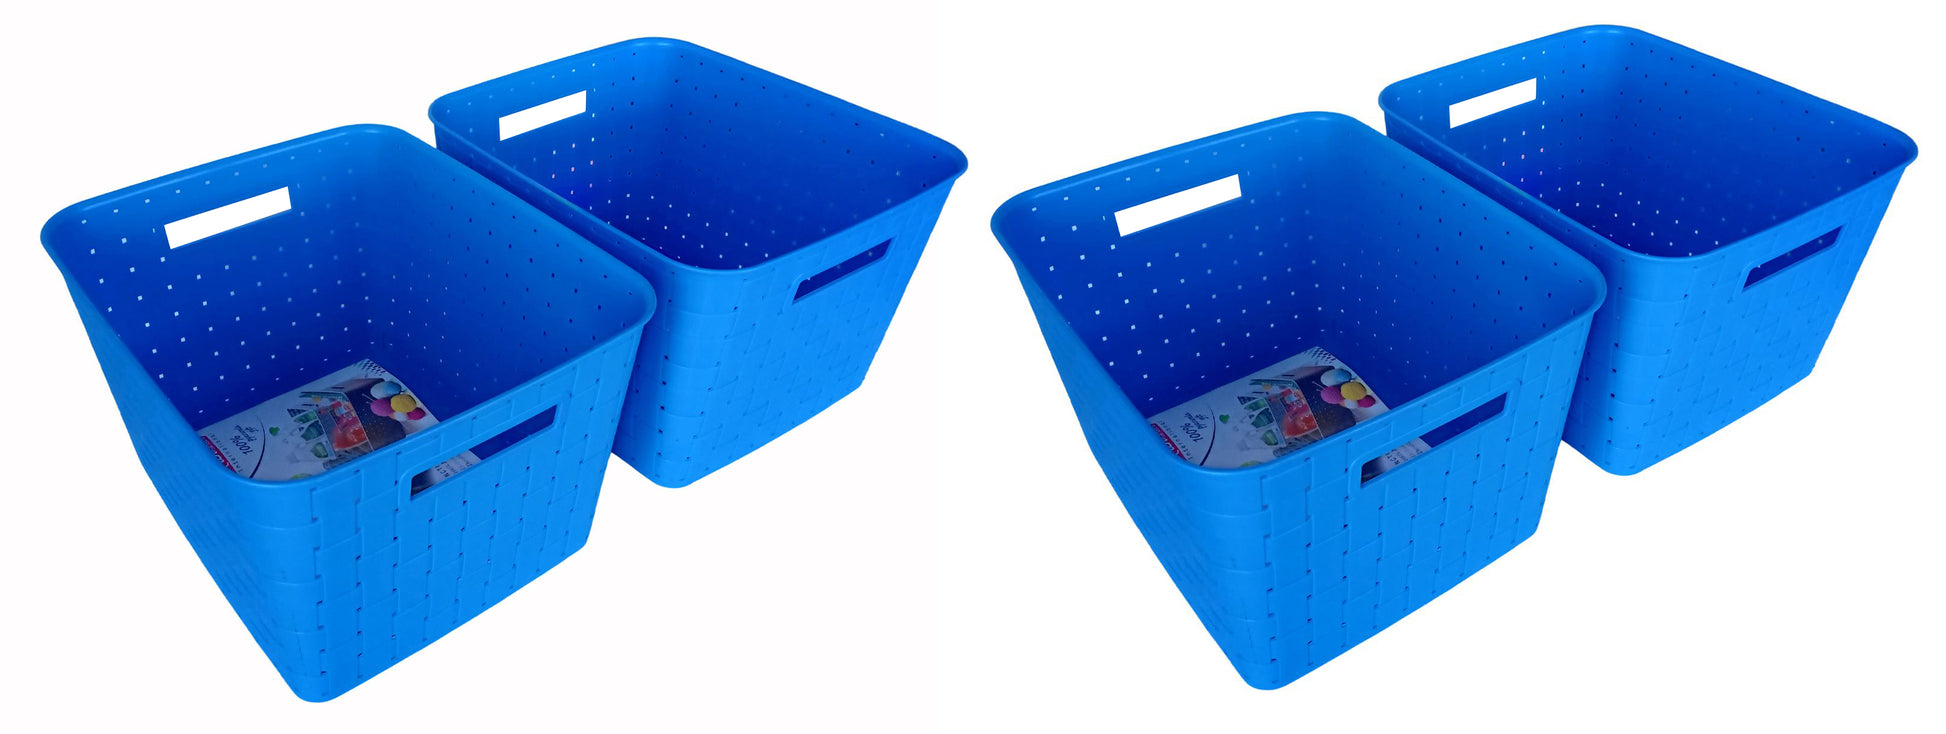 Plastic Checkered Extra Large Storage Baskets without lid Ocean Blue Colour upper & side view set of 4